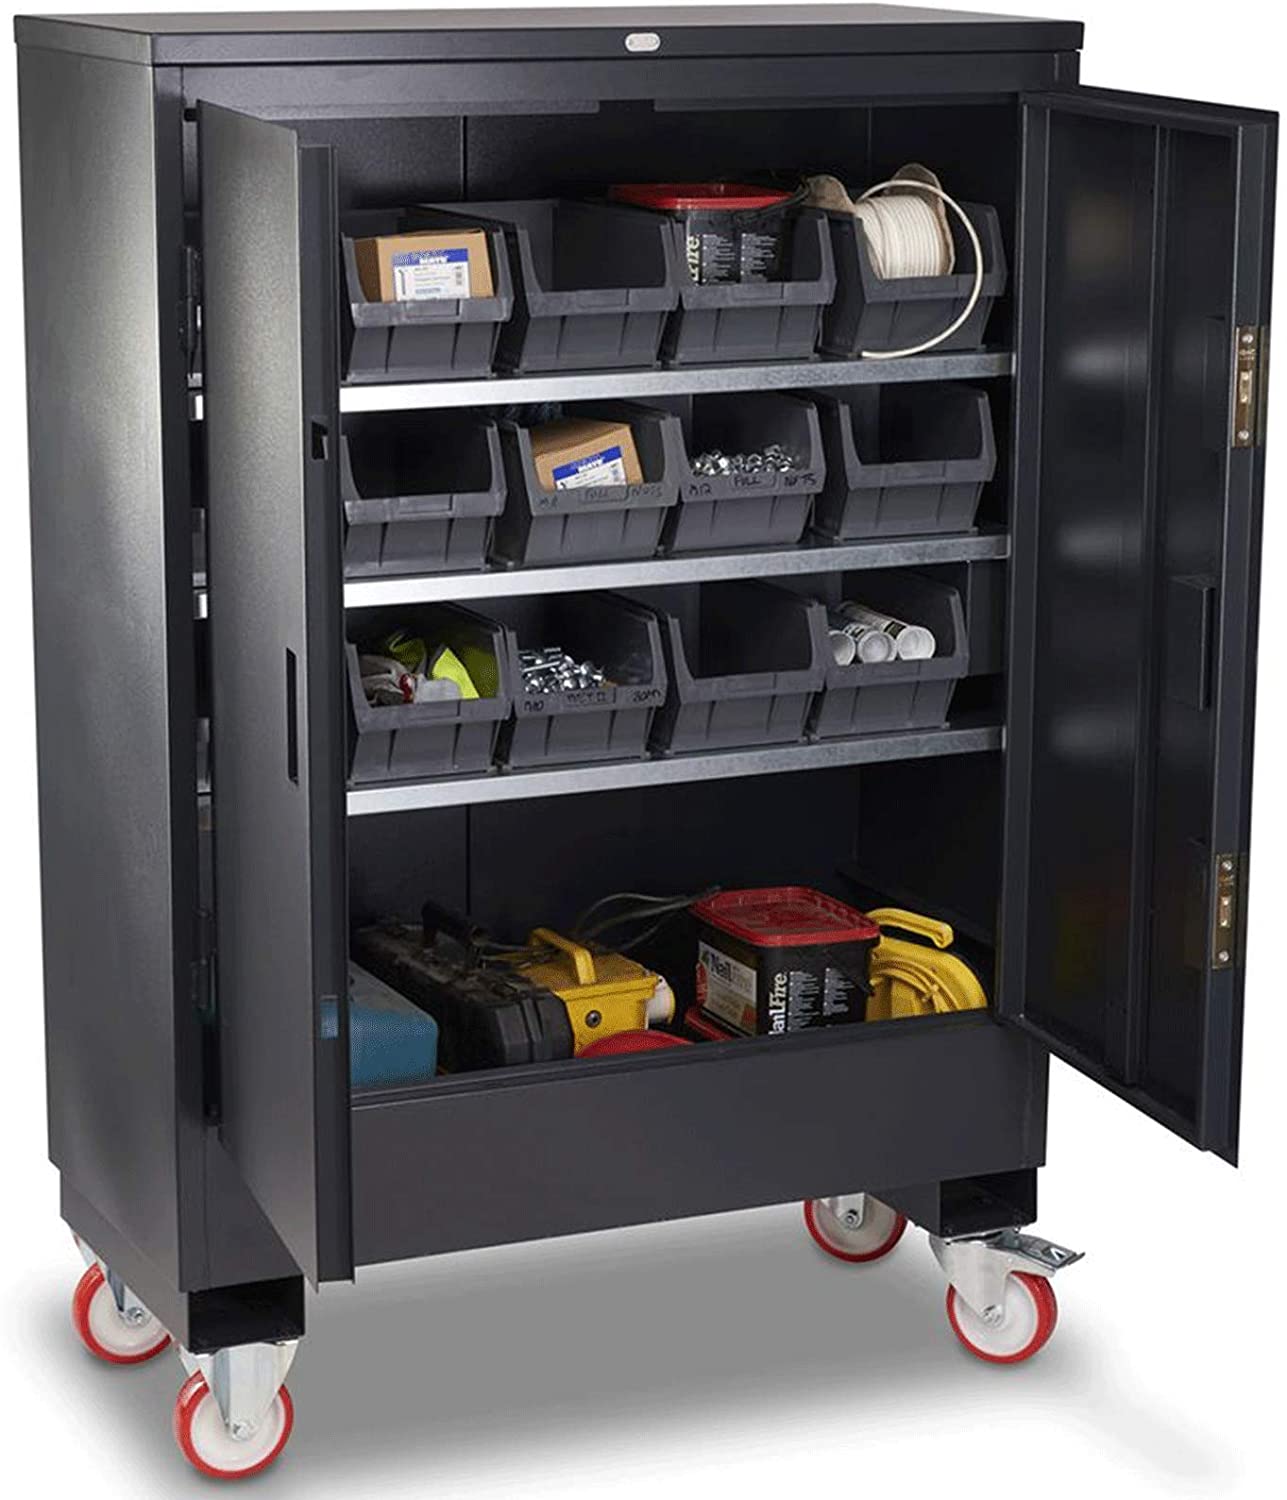 Armorgard - FITTINGSTOR Mobile Fittings Cabinet 1200x550x1750